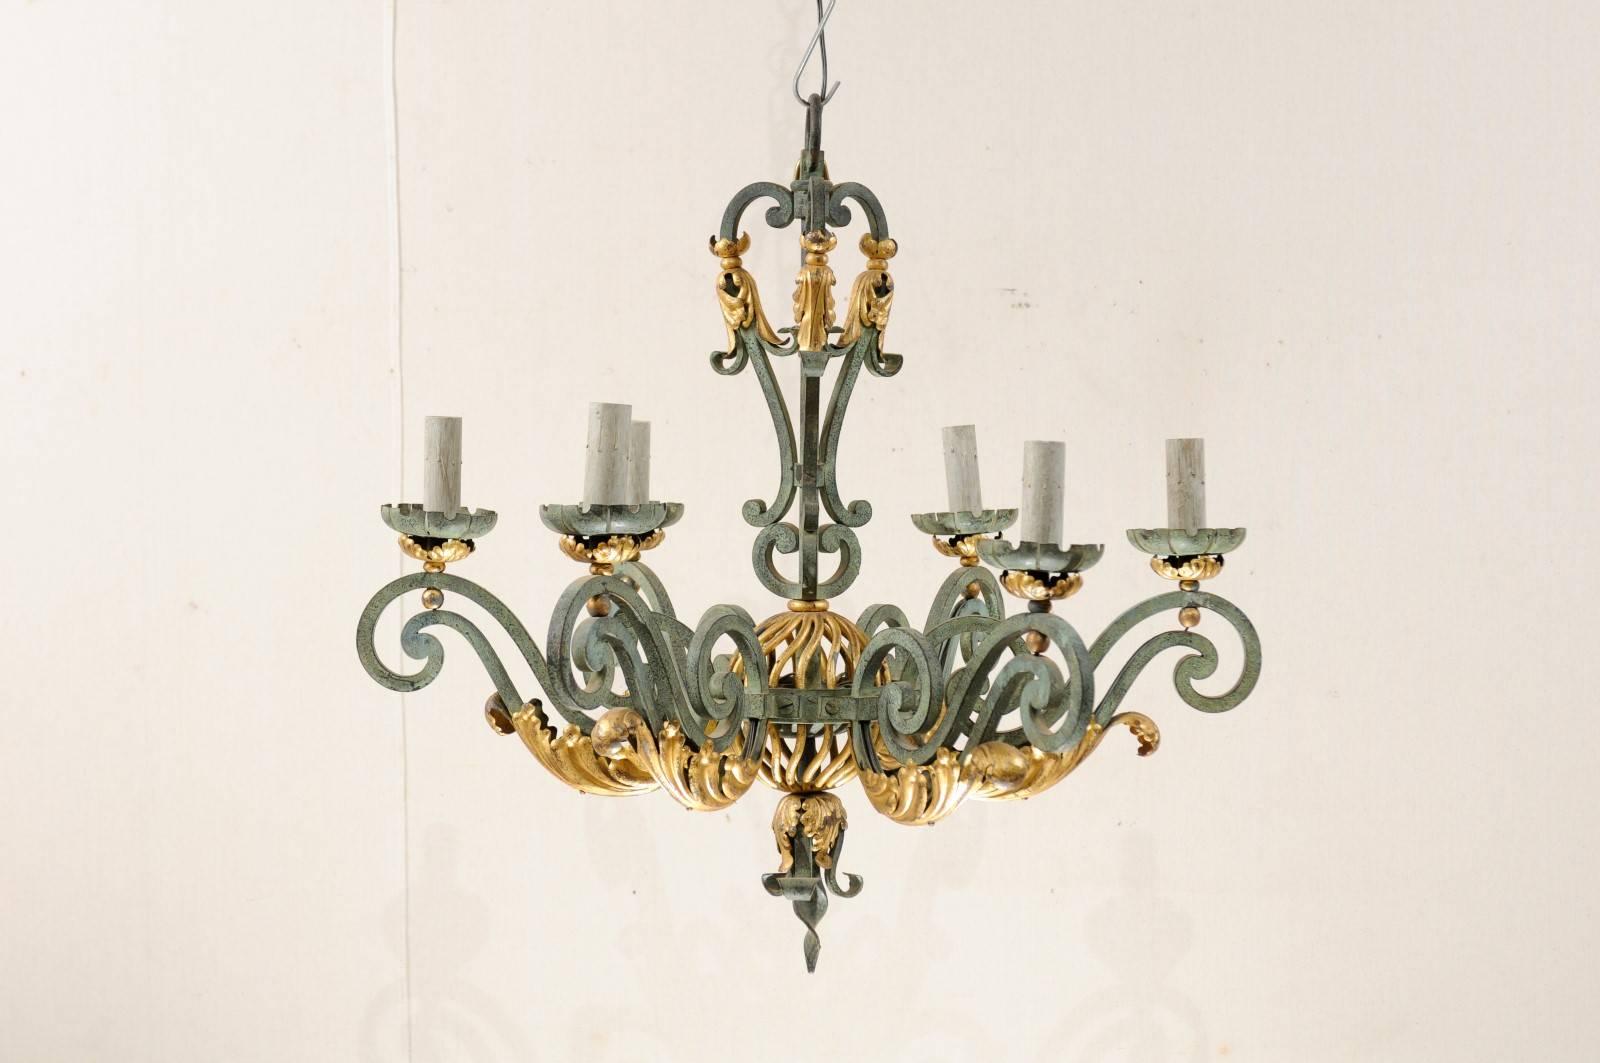 A French six-light chandelier with verdigris finish. This French mid-20th century painted and forged iron chandelier features applied gilded acanthus leaves on the scrolled arms and a pierced orb in its center. This chandelier has been rewired for